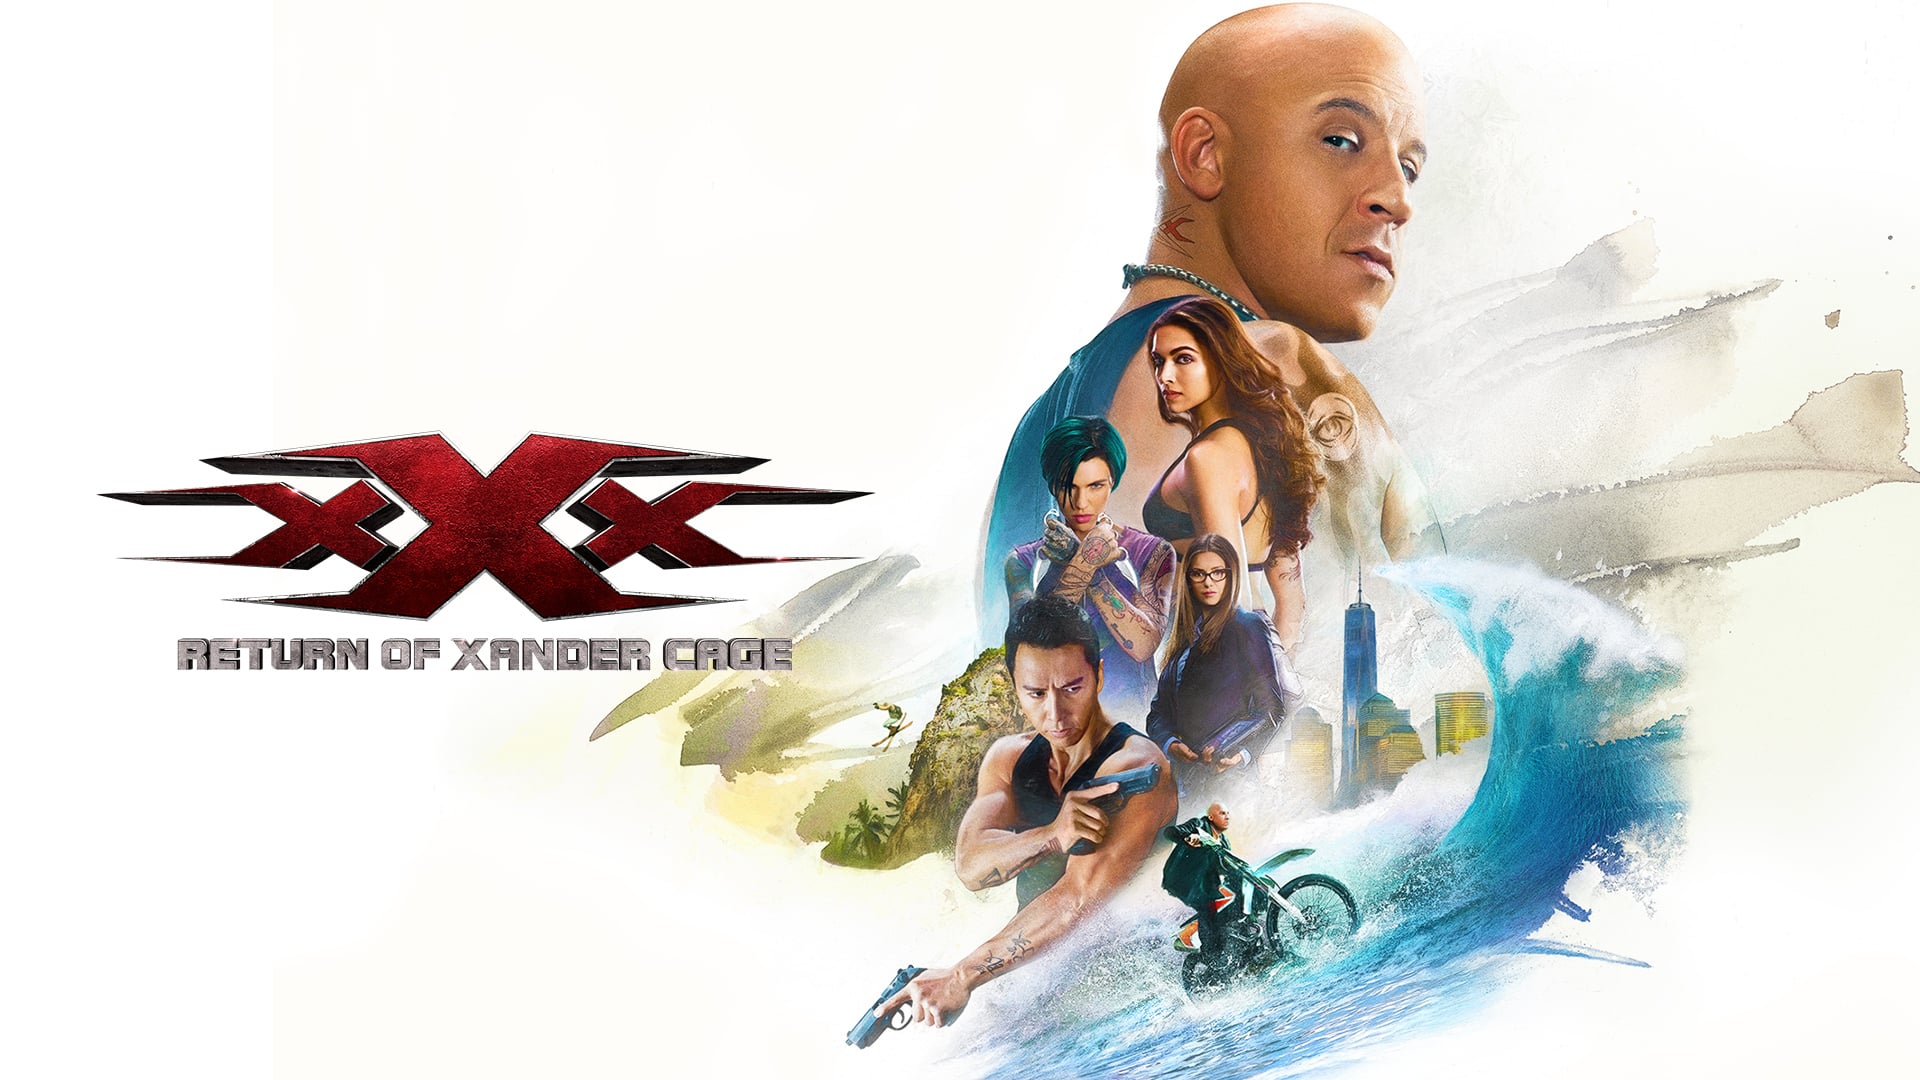 Xxx Return Of Xander Cage Free Download